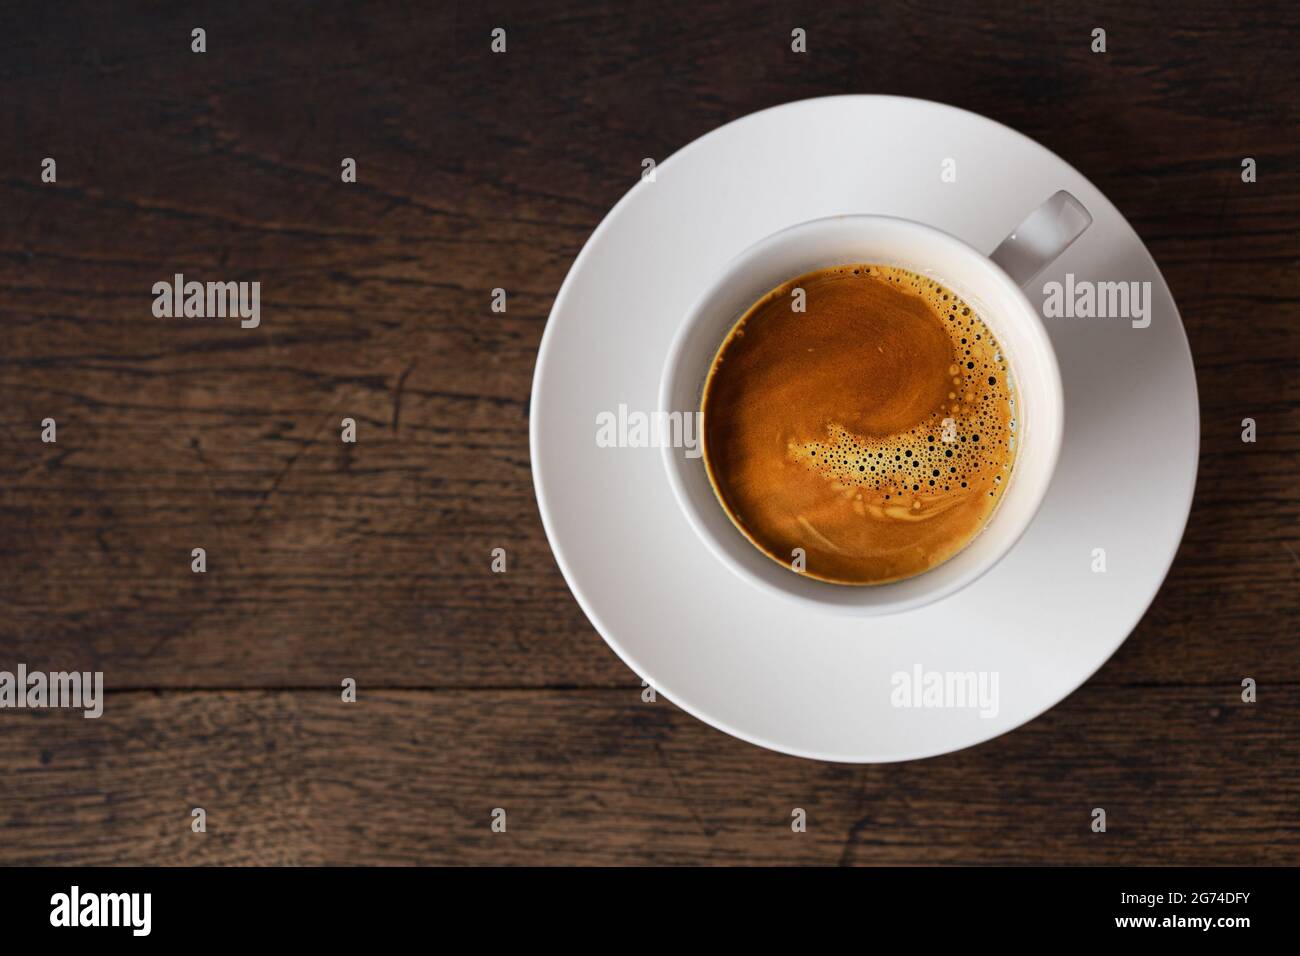 dark rost espresso coffee on white cup on old wooden table background with copy space. Stock Photo